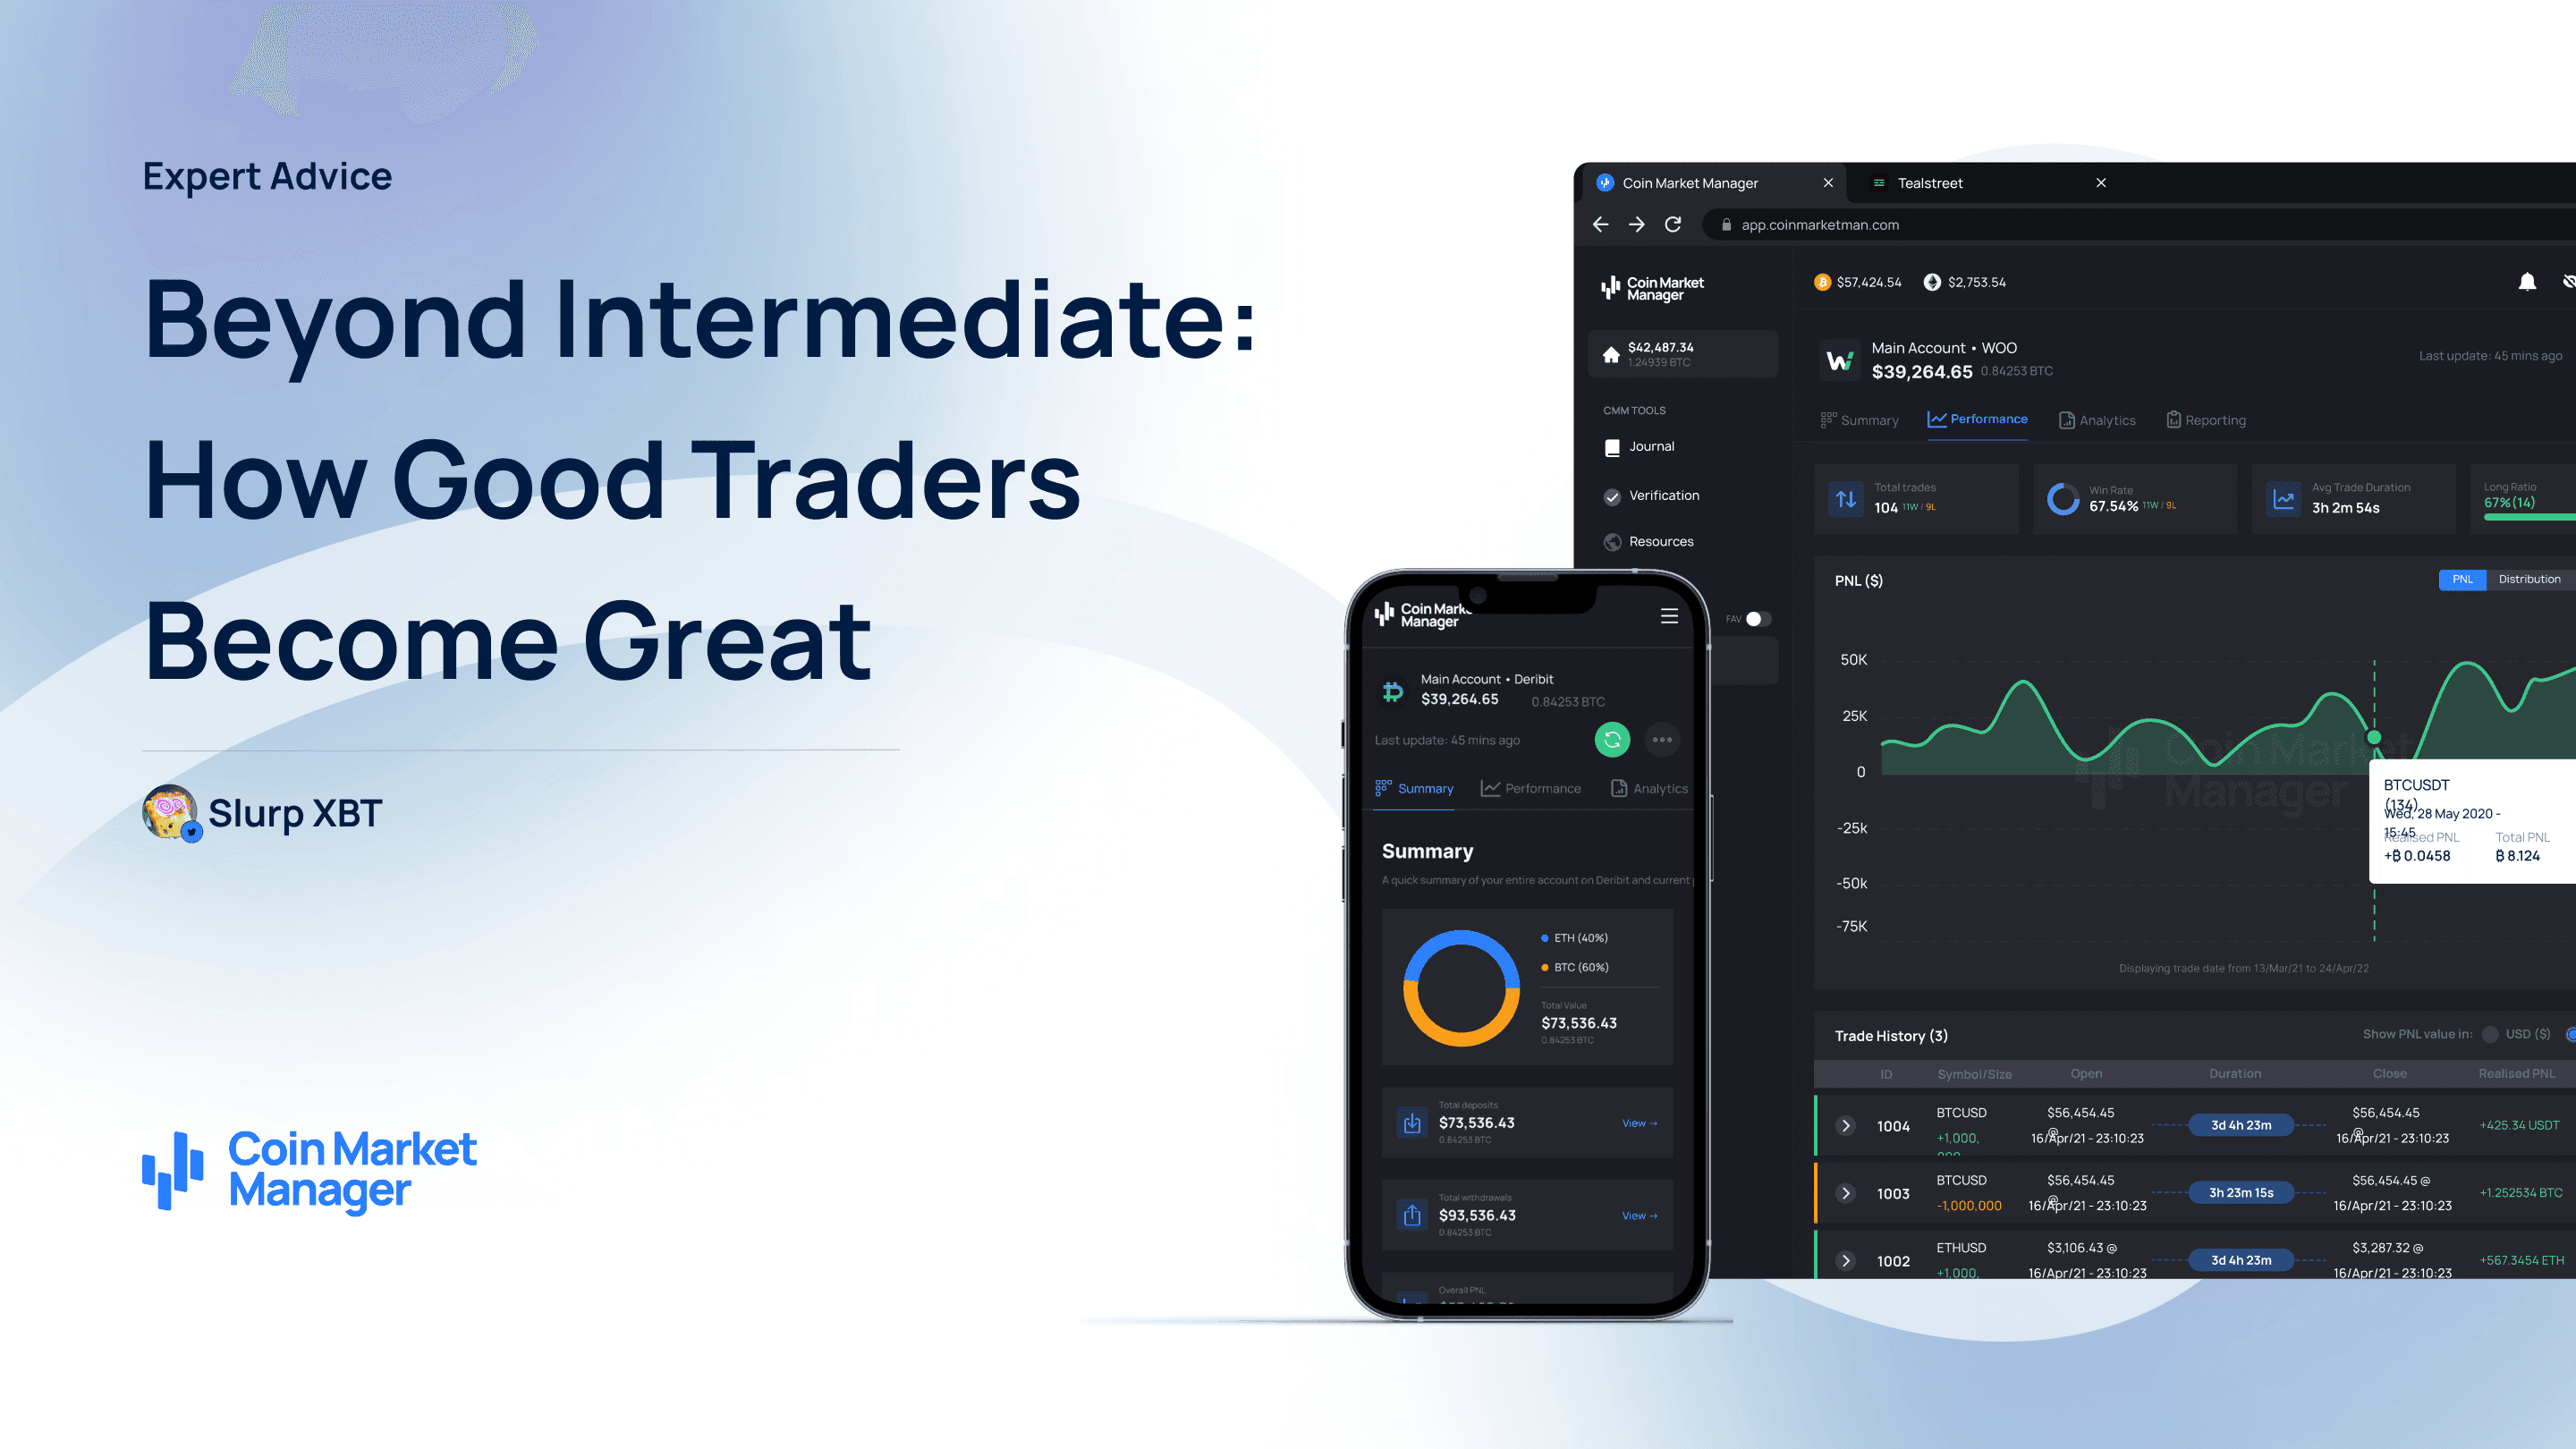 Beyond Intermediate: How Good Traders Become Great